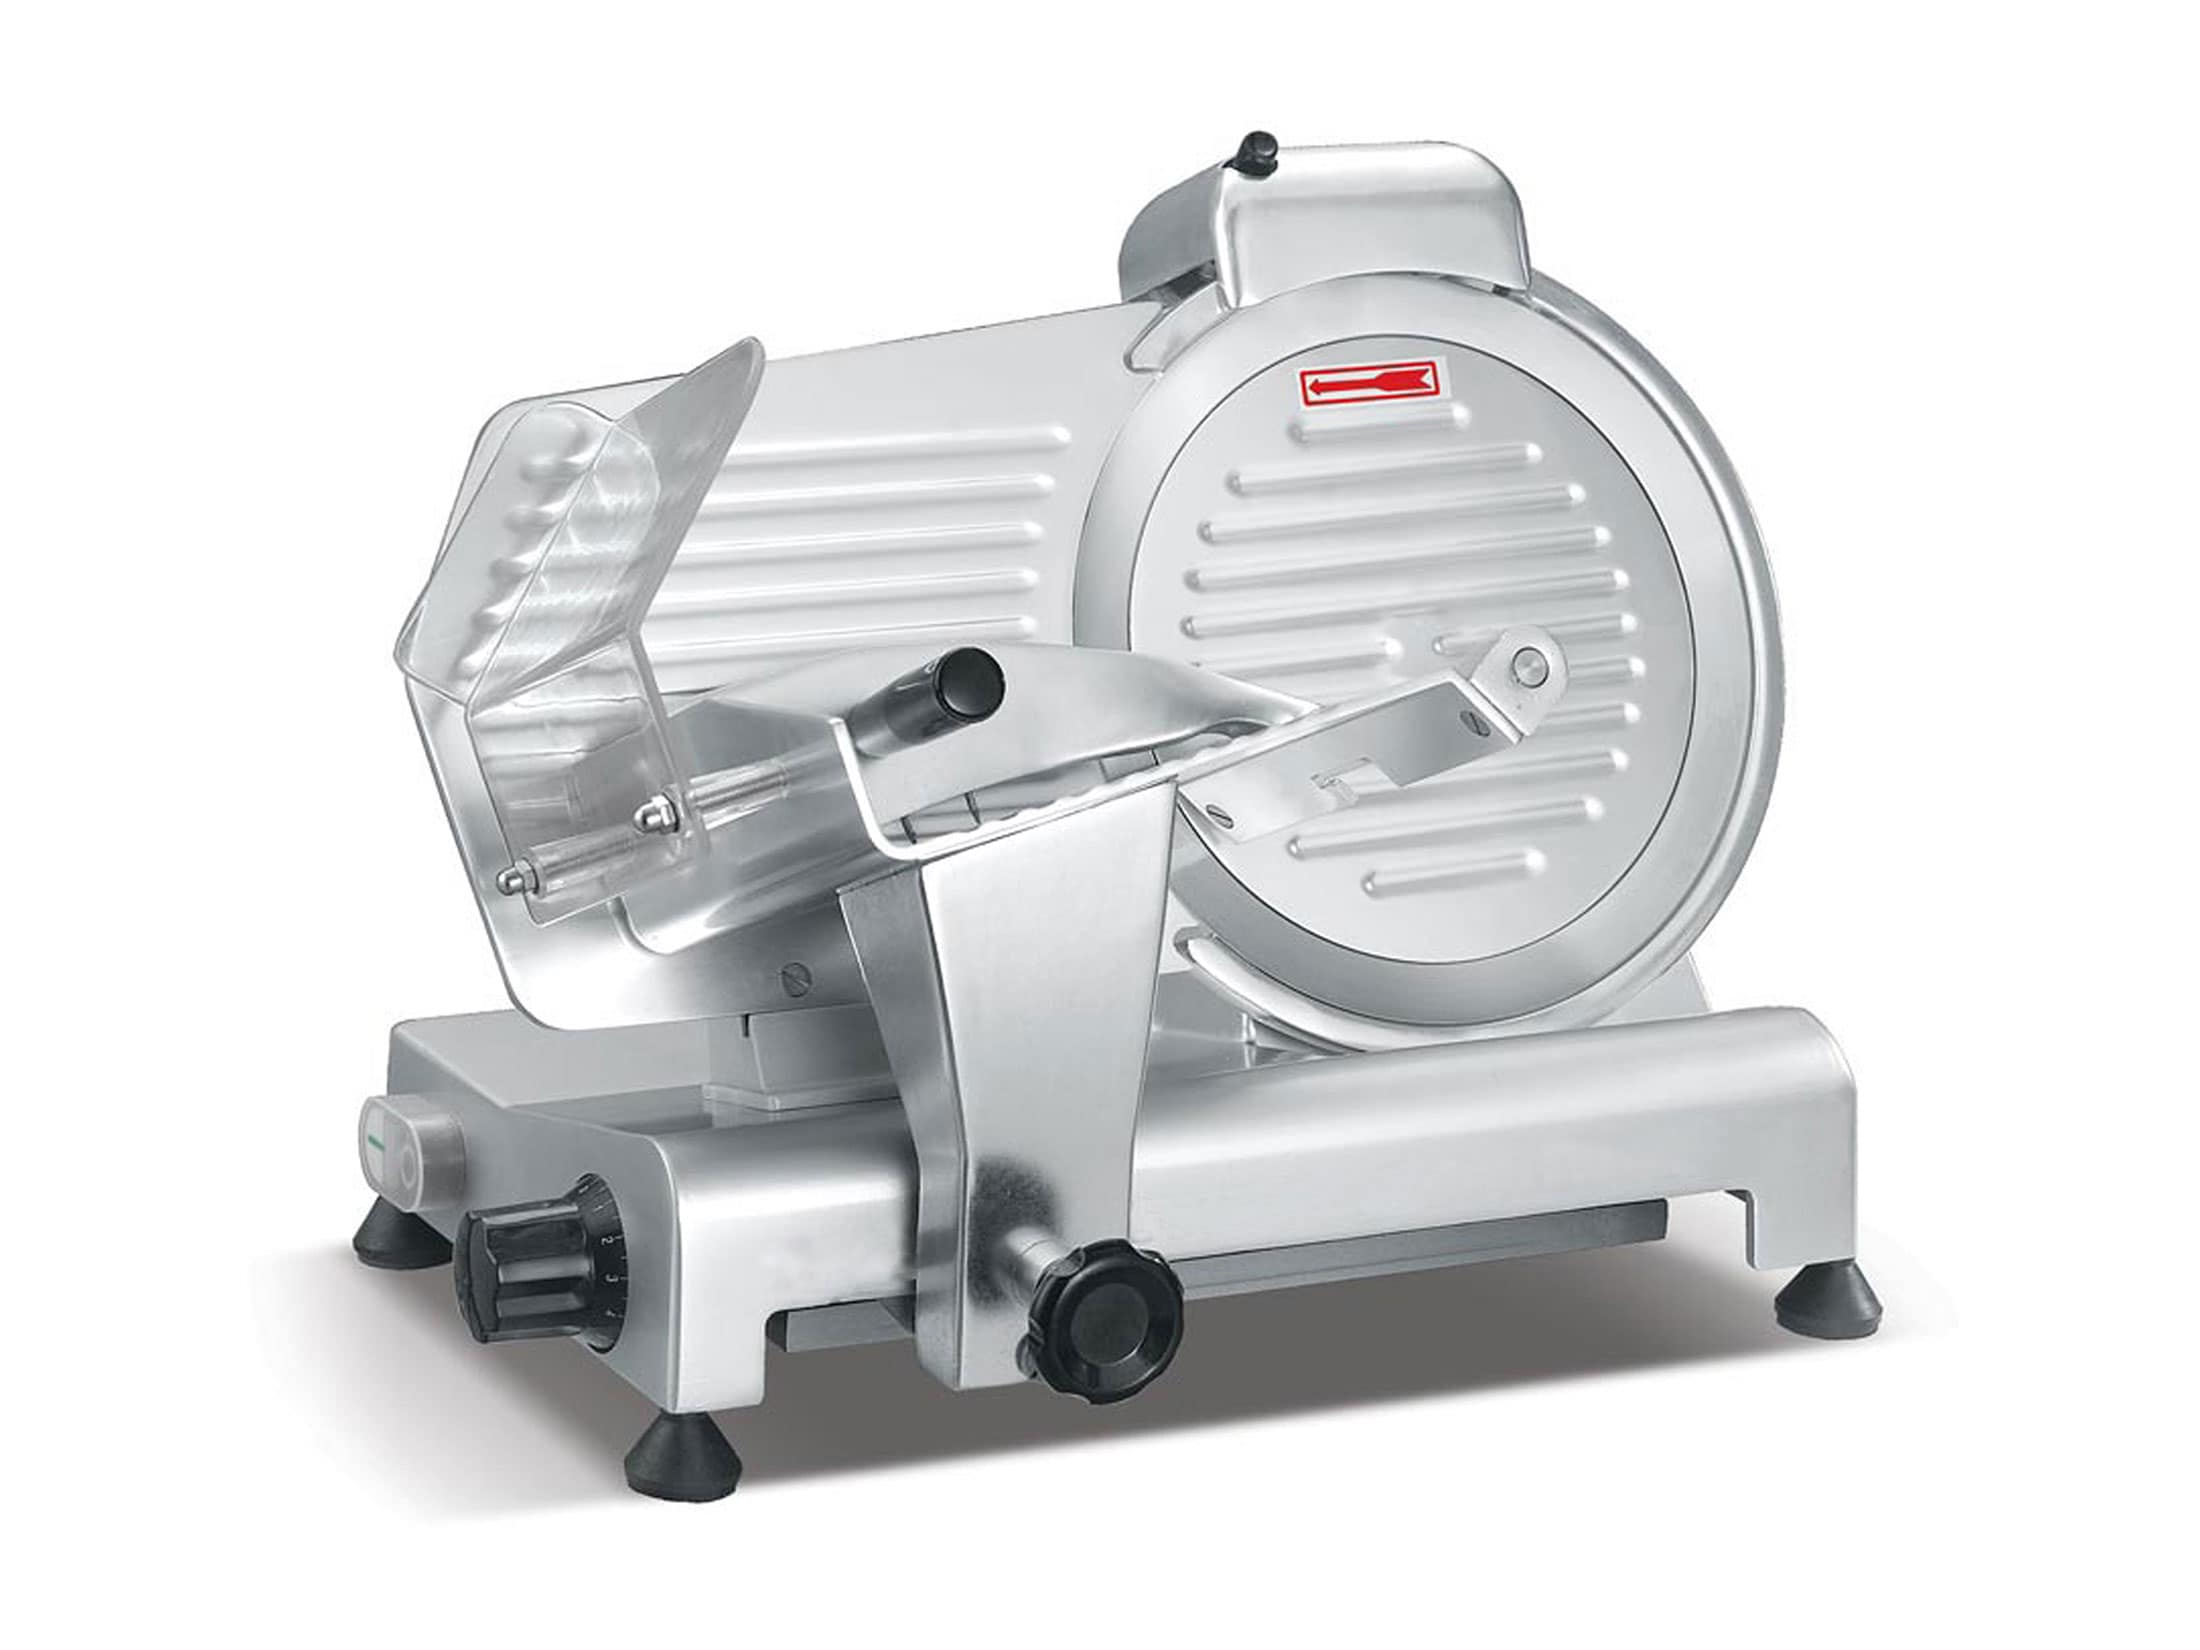 LEM 10" Professional Electric Meat Slicer Stainless Steel